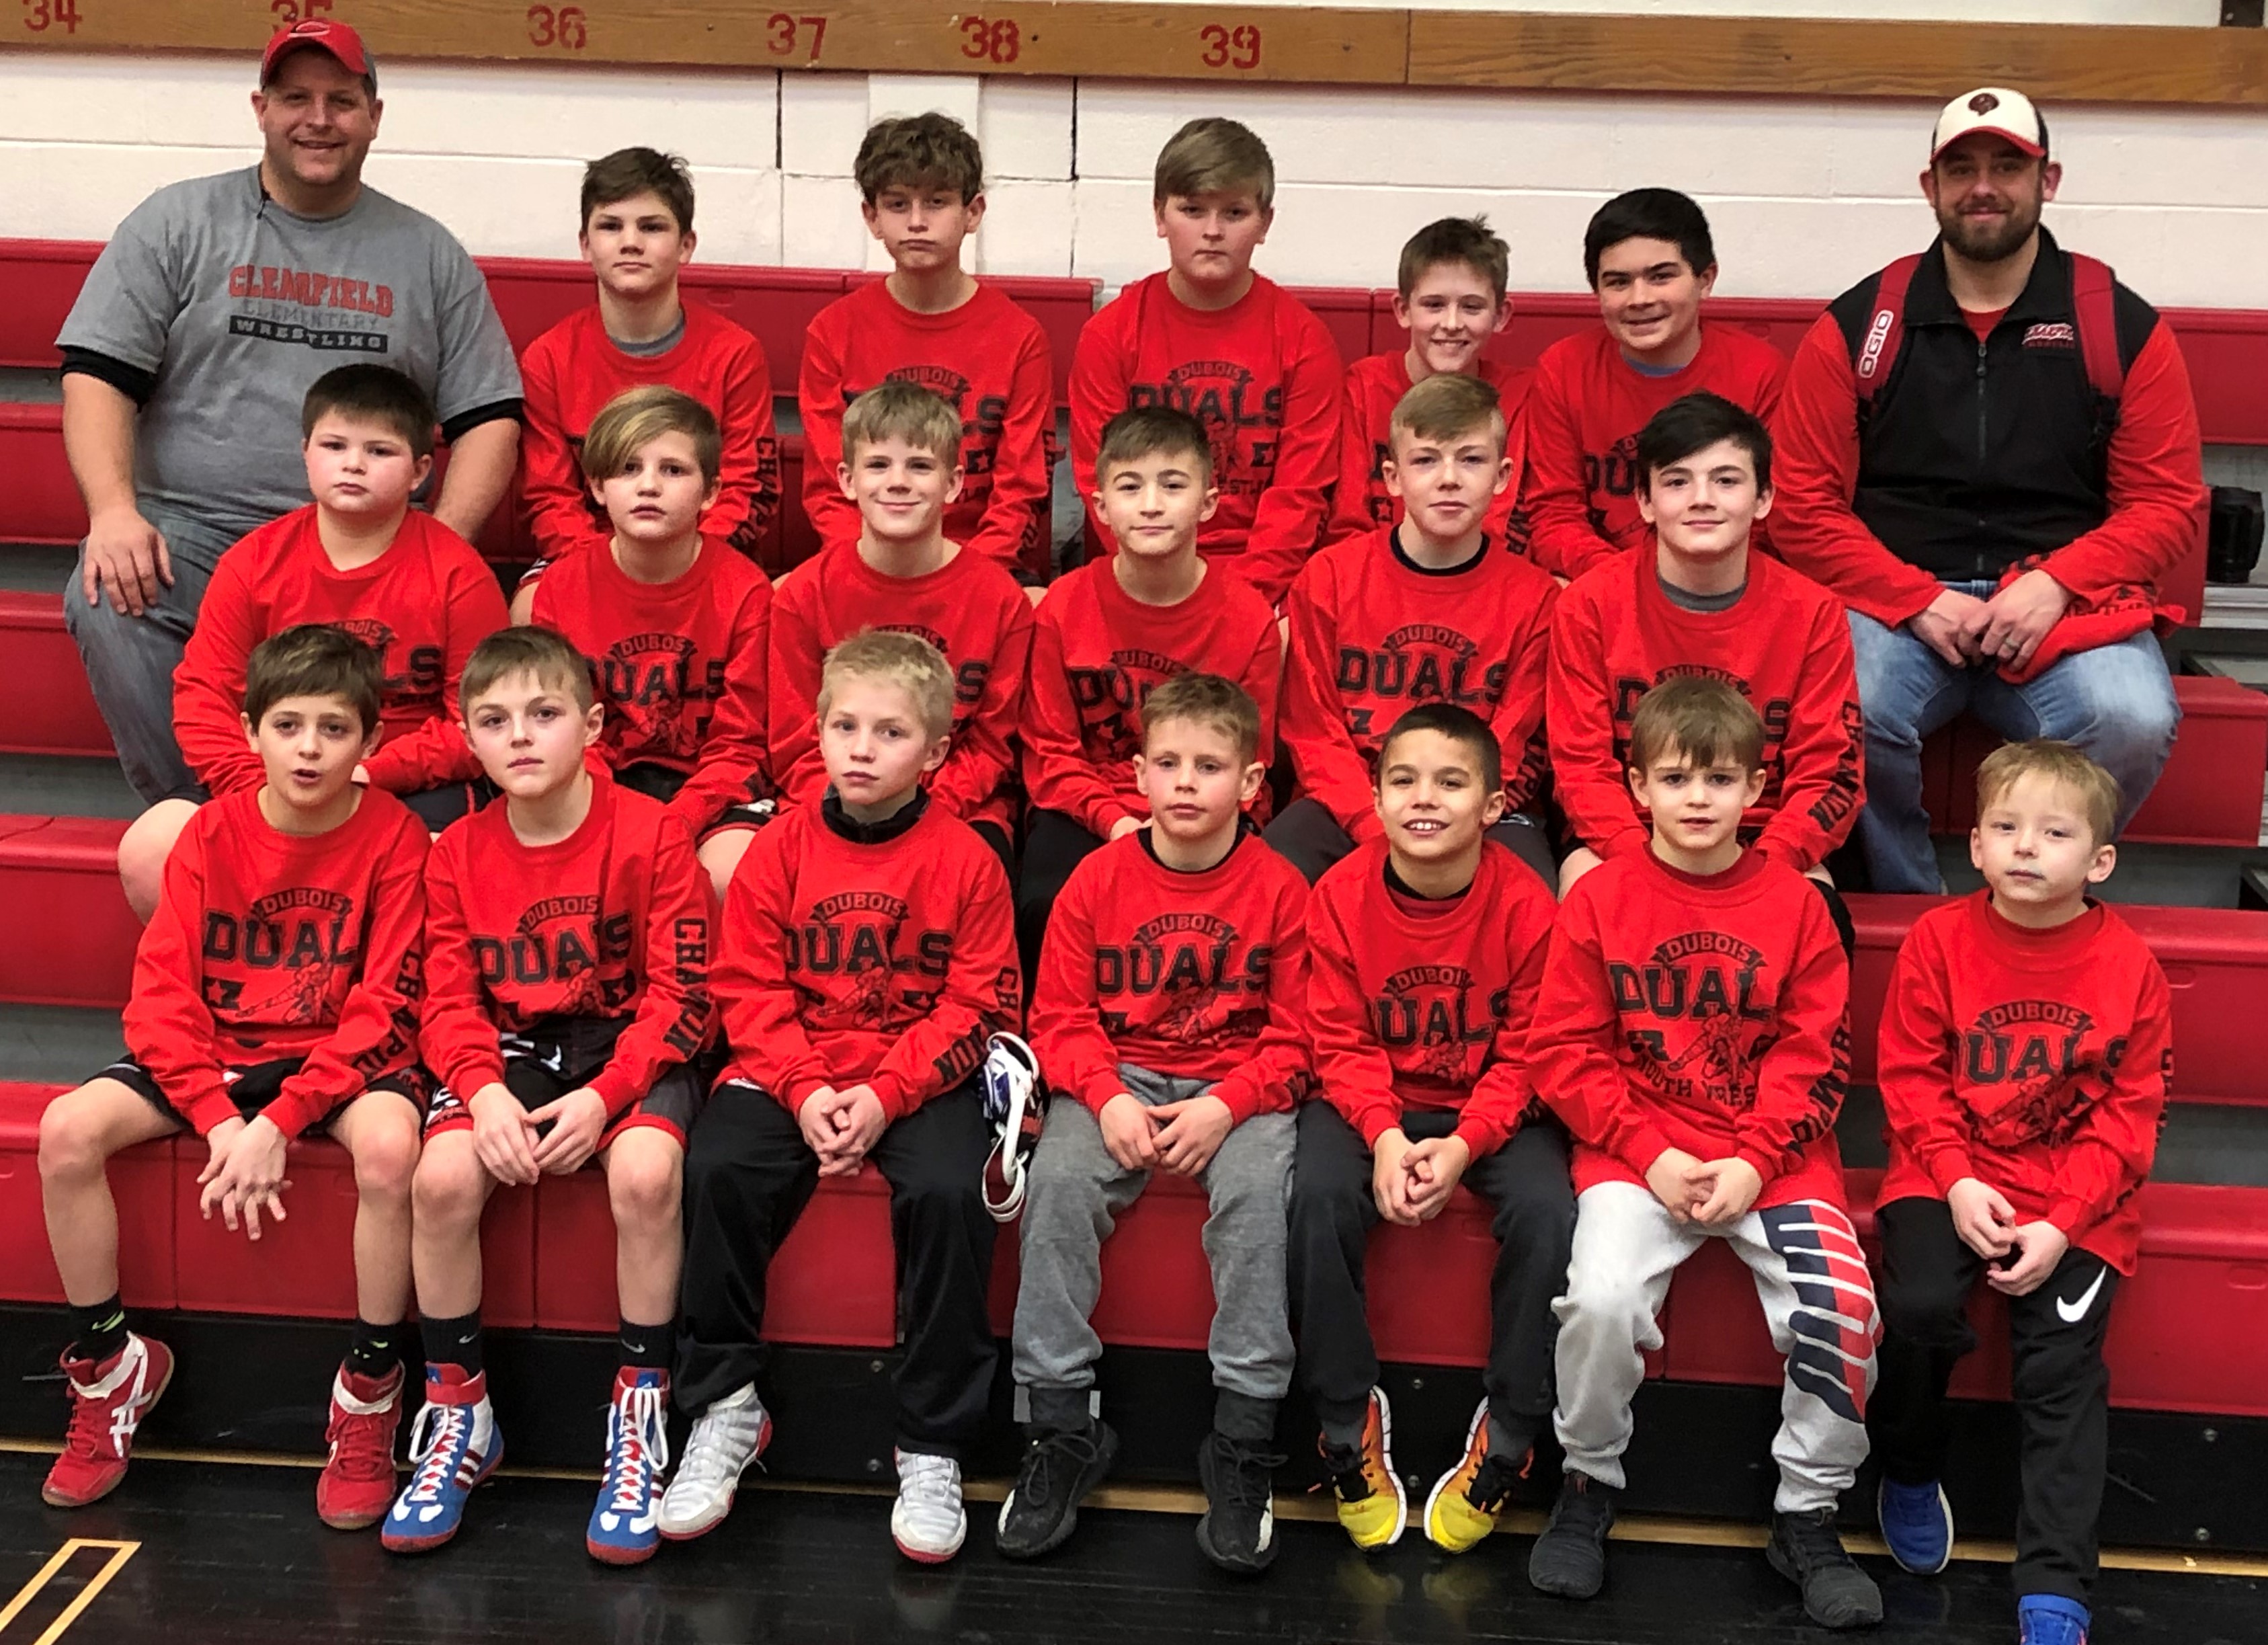 L to R, Front Row: Xavier Lutz Glace, Connor Peacock, Bo Aveni, Matt Rowles, Carter Christ, Brady Dobson, Landon Rowles.  Second Row: Brayden Wills, Colten Bumbarger, Cash Diehl, Colten Ryan, Asher Cunningham, and Brady Collins.  Back Row: Coach Aaron Rowles, Carter Freeland,  Monte Dietrick, Tyler Sinclair, Elliotte Minor, Caleb Close, and Coach Harlen Funk.